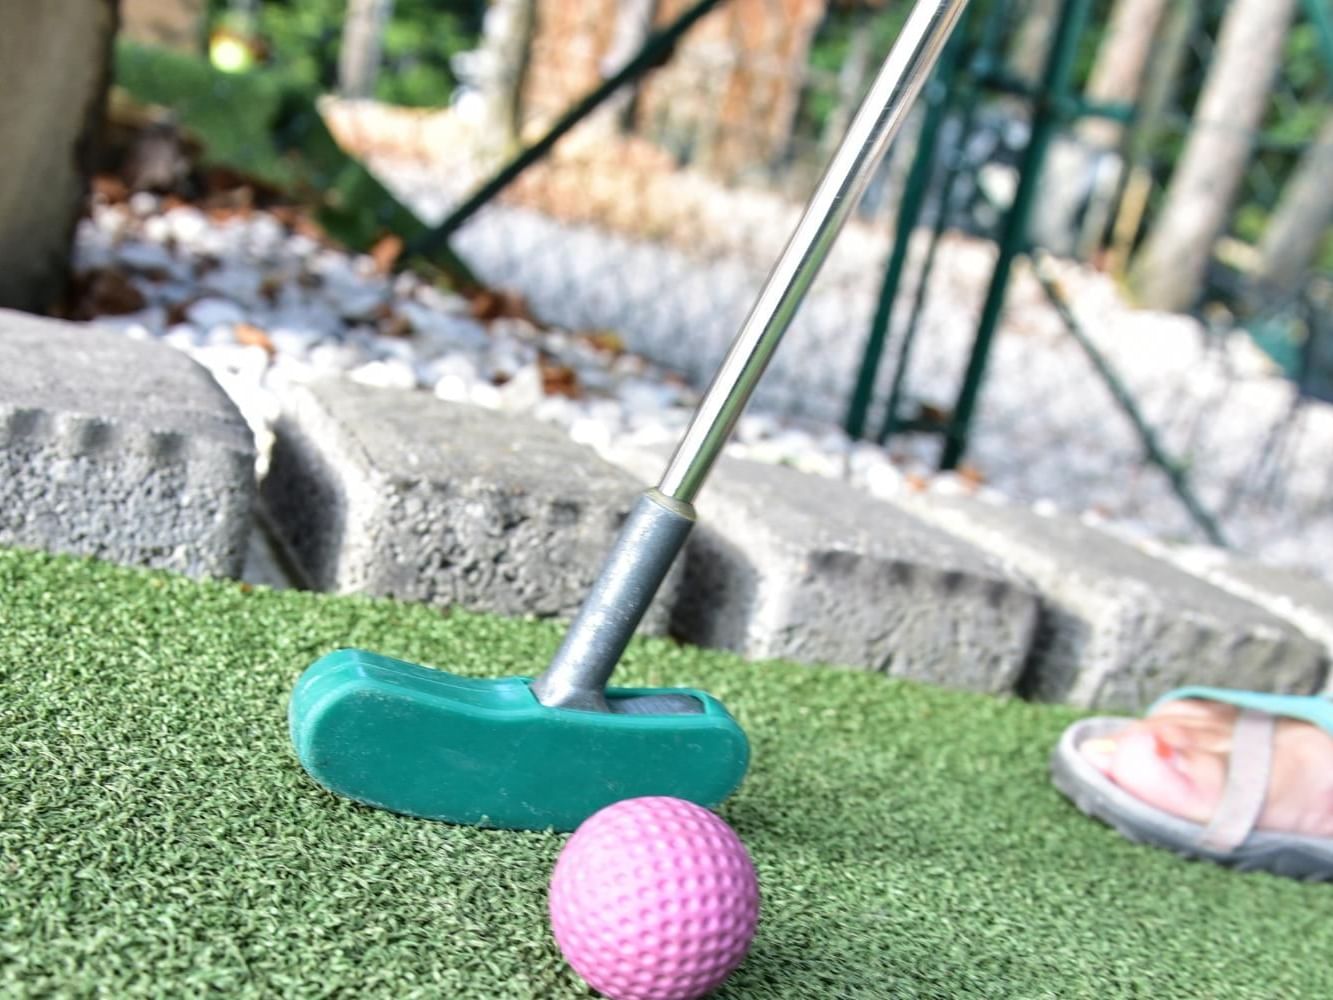 A person playing mini golf with a pink ball at Wonder Mountain Fun Park near Meadowmere Resort